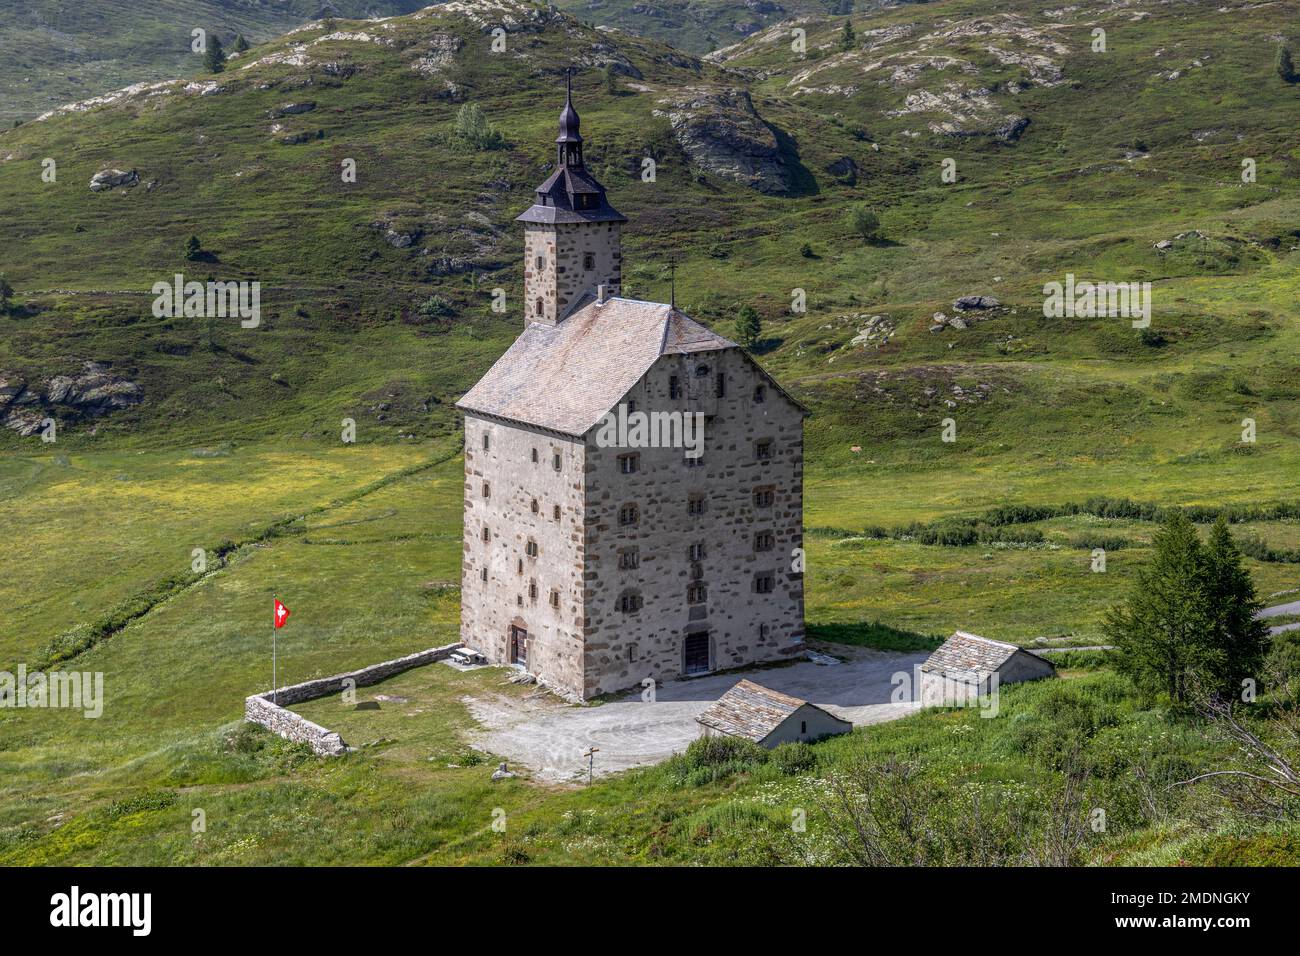 The Old Ospice (Altes Hospiz) at the Simplon pass, Switzerland Stock Photo